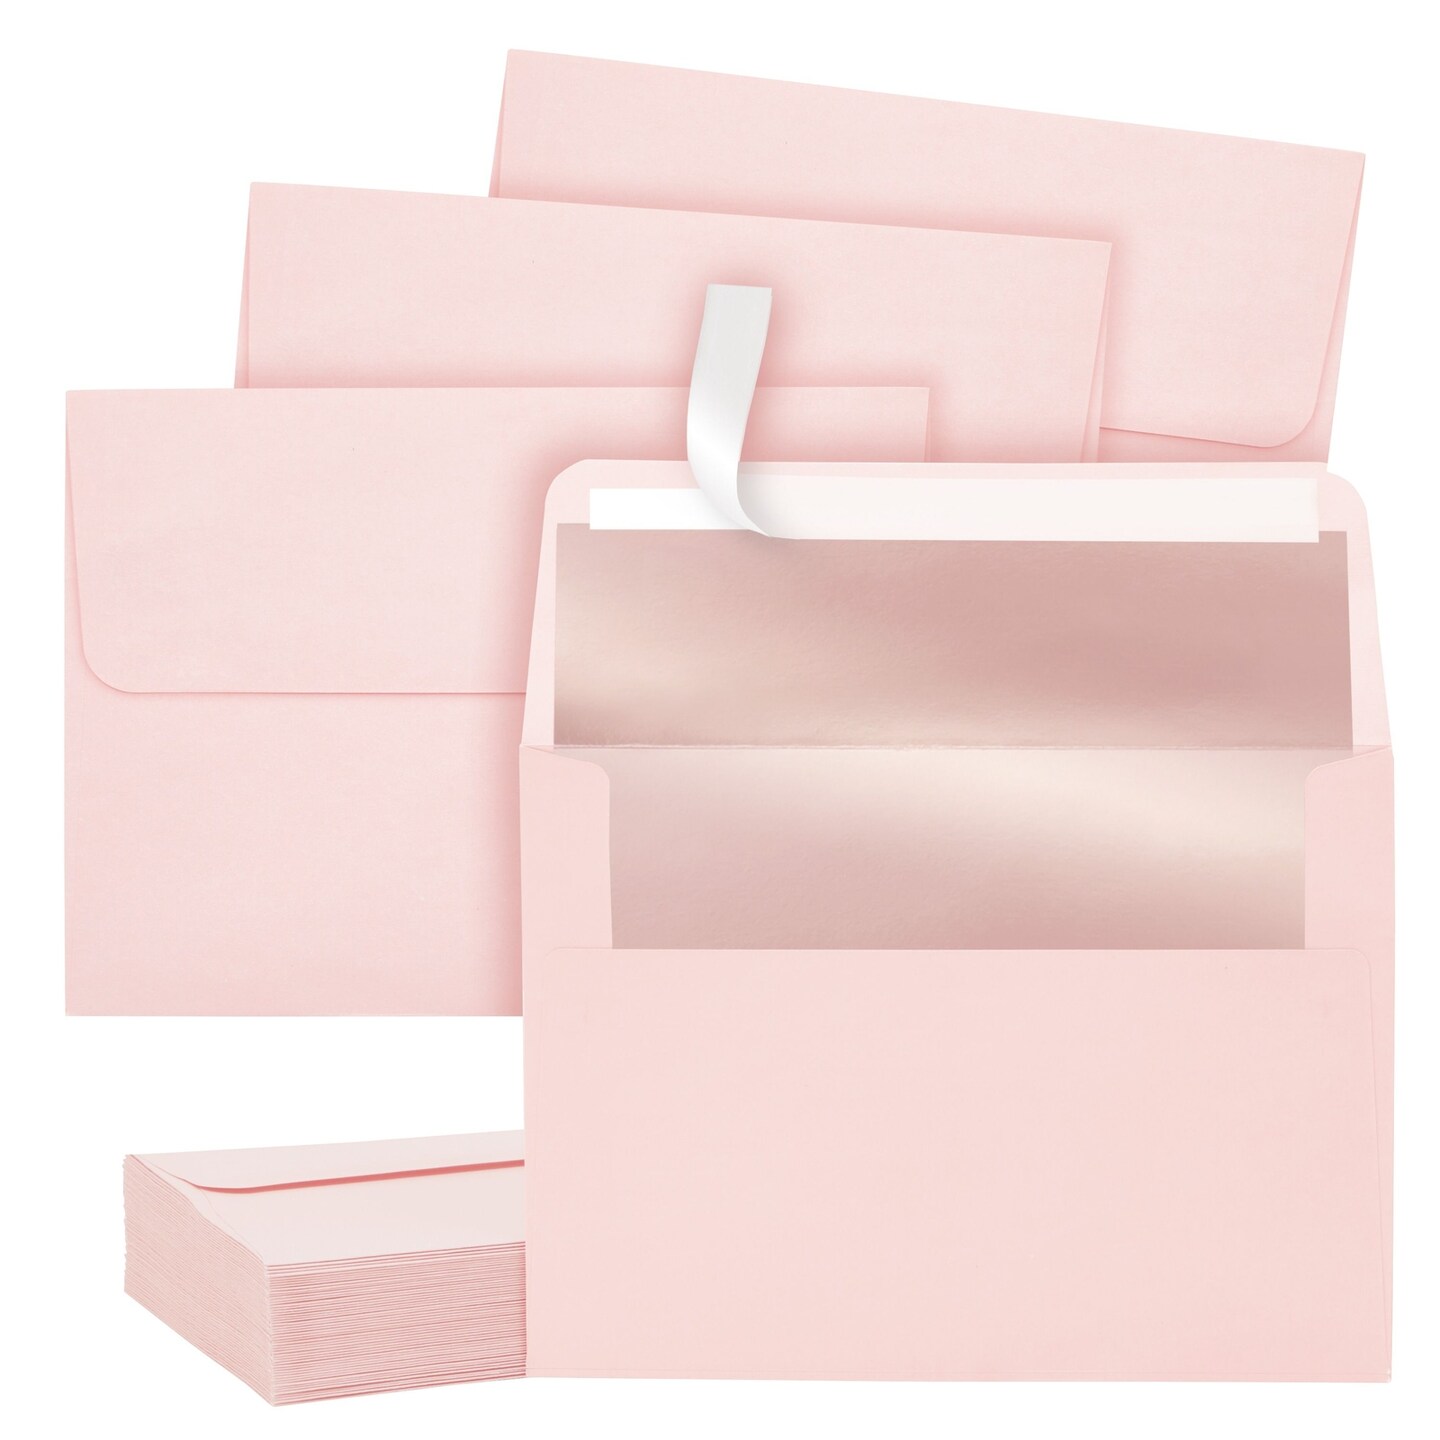 Blank 80# A7 Basic 5x7 Card Stock (50 Pack, Pink)